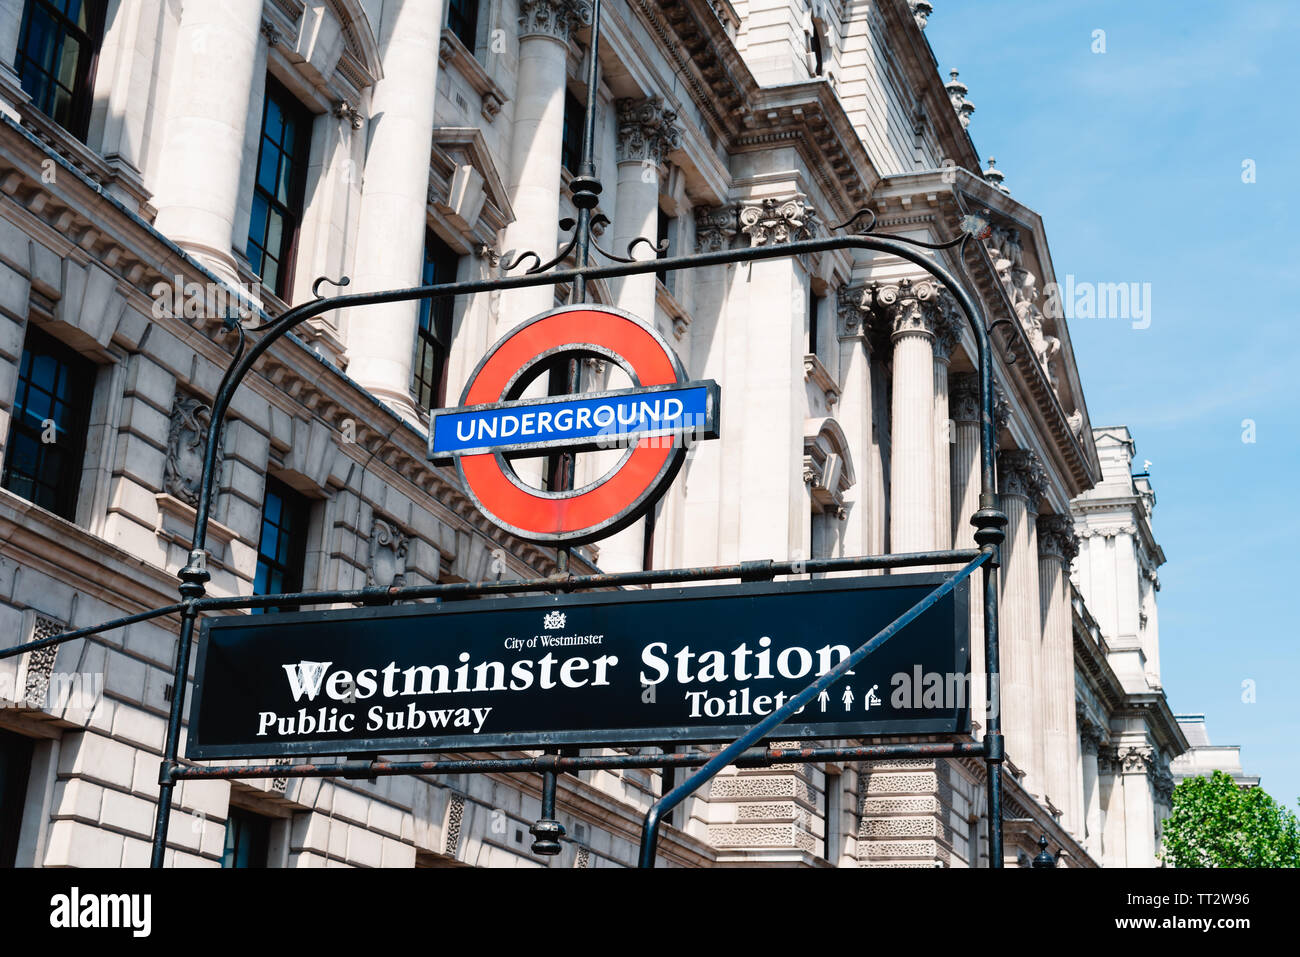 London, UK - May 15, 2019: Low angle view of Underground sign Westminster Station against buildings a sunny day Stock Photo